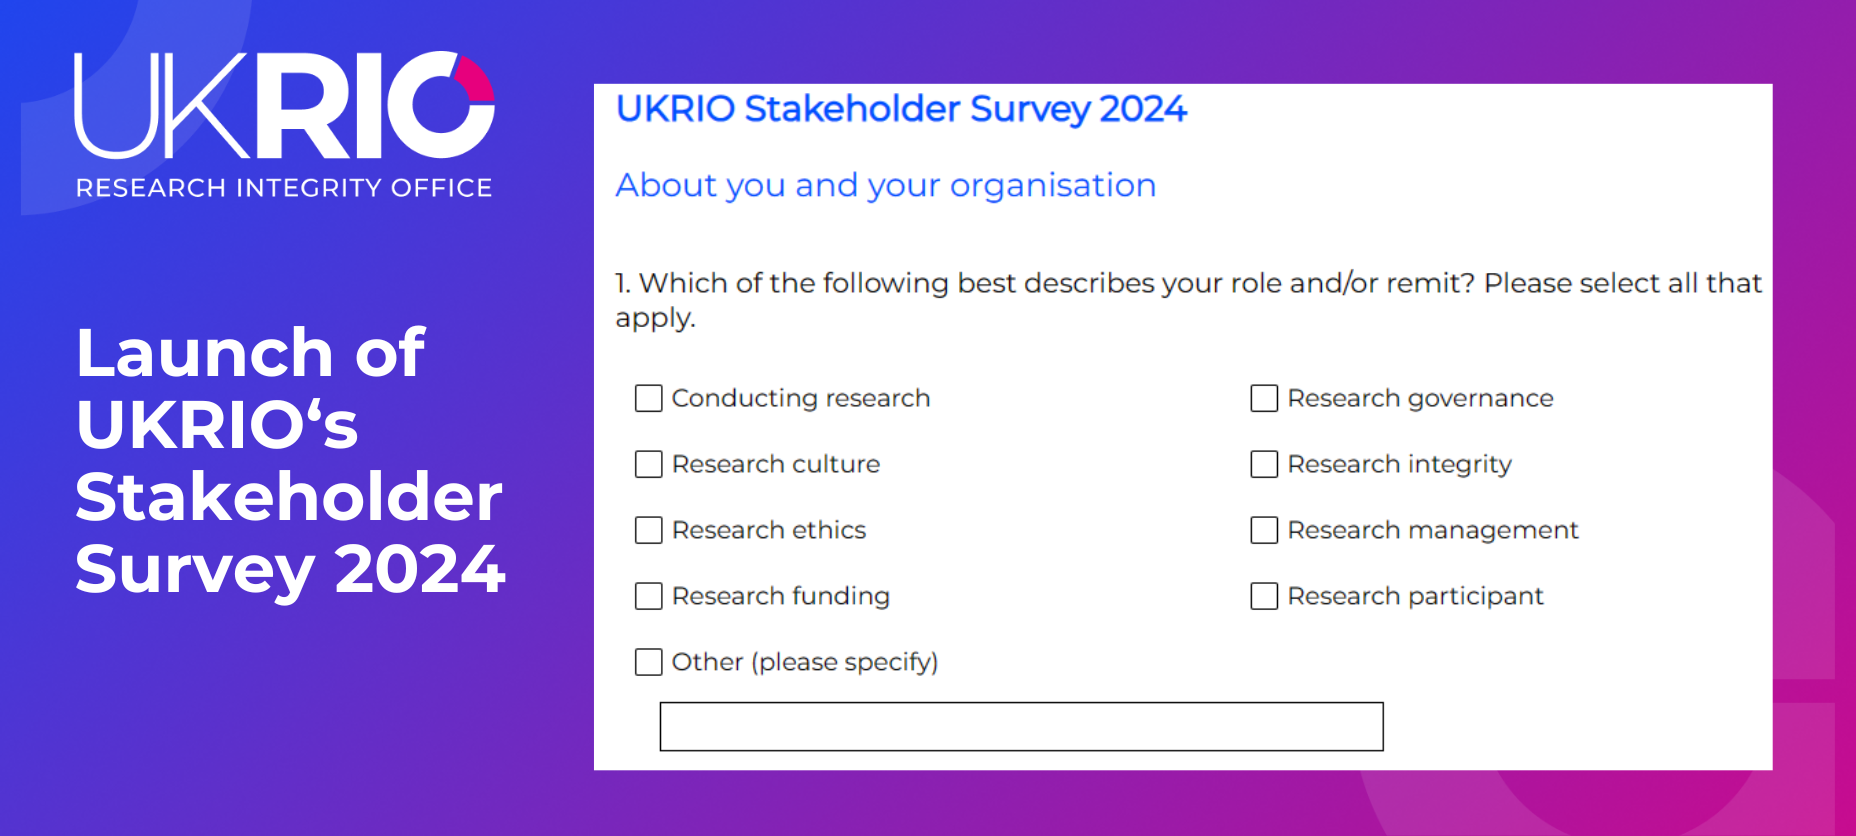 Launch of UKRIO's Stakeholder Survey 2024